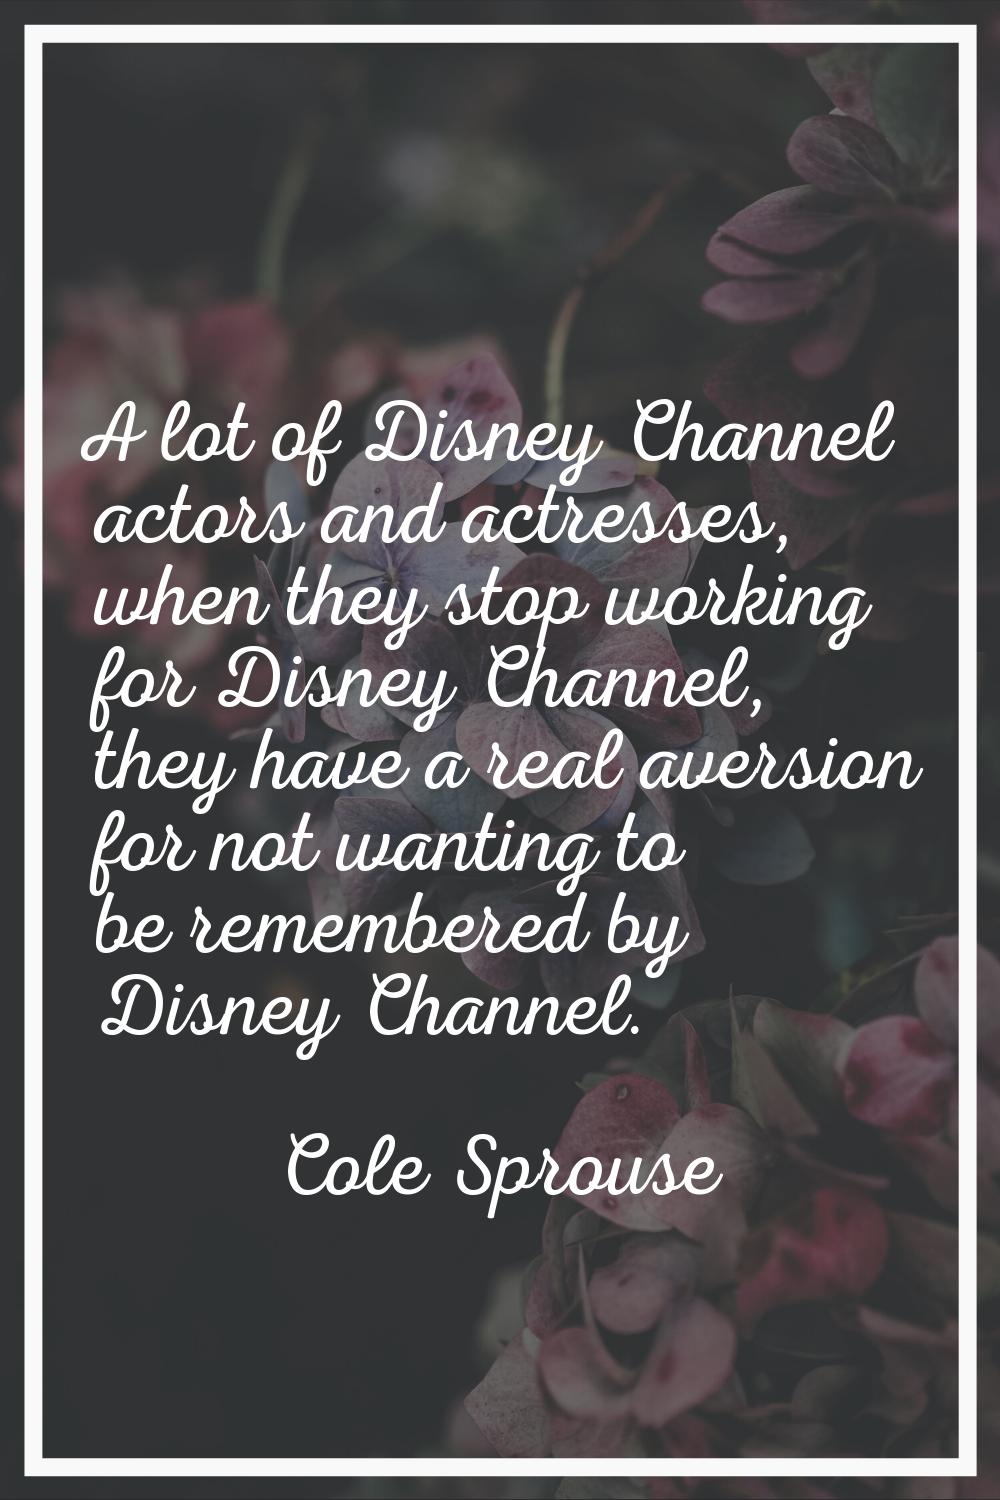 A lot of Disney Channel actors and actresses, when they stop working for Disney Channel, they have 